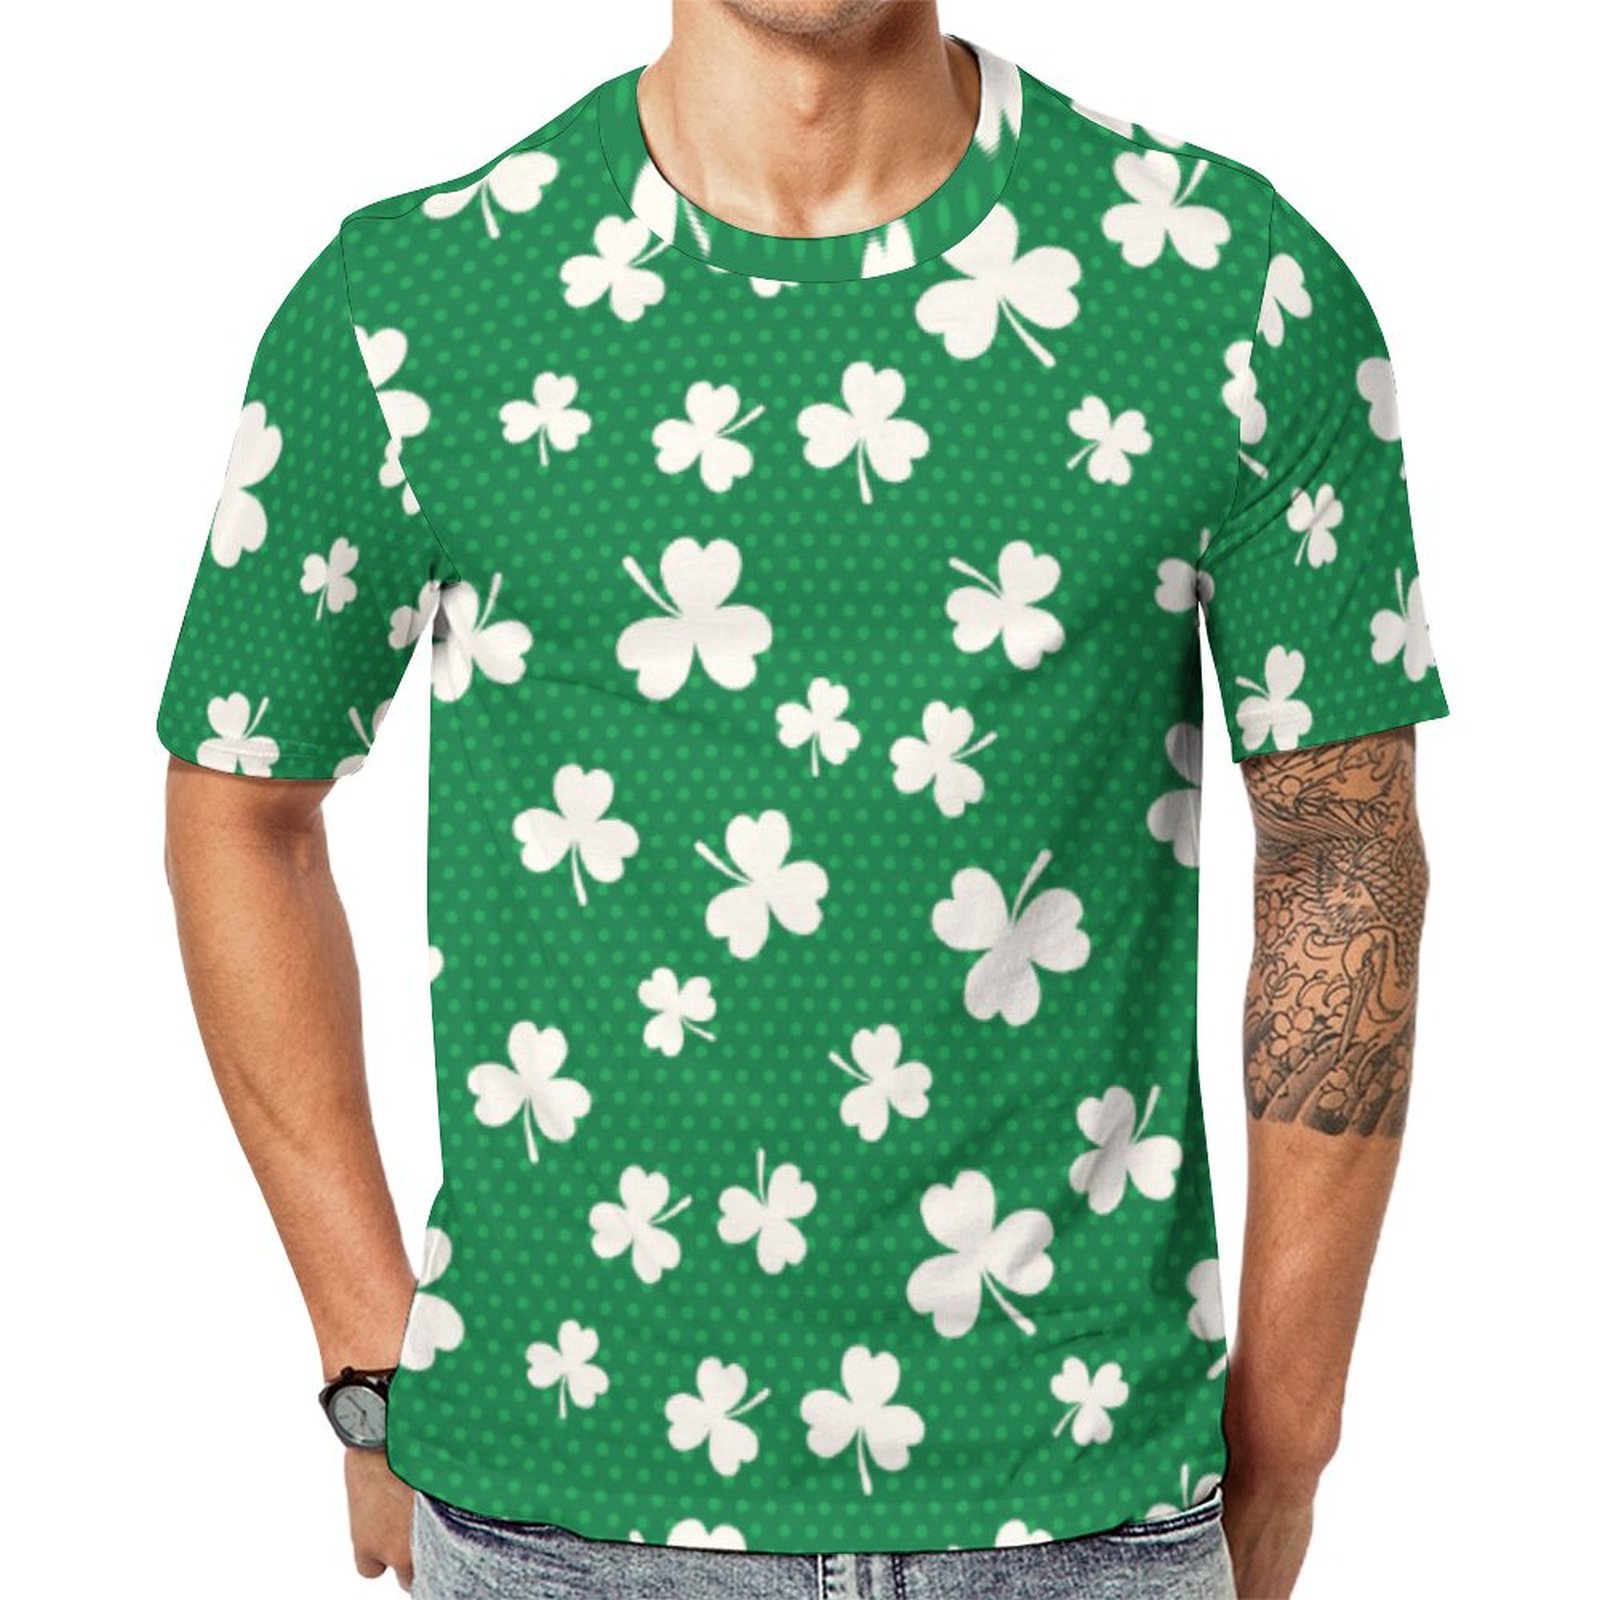 Shamrock St Patrick's Day Short Sleeve Print Unisex Tshirt Summer Casual Tees for Men and Women Coolcoshirts